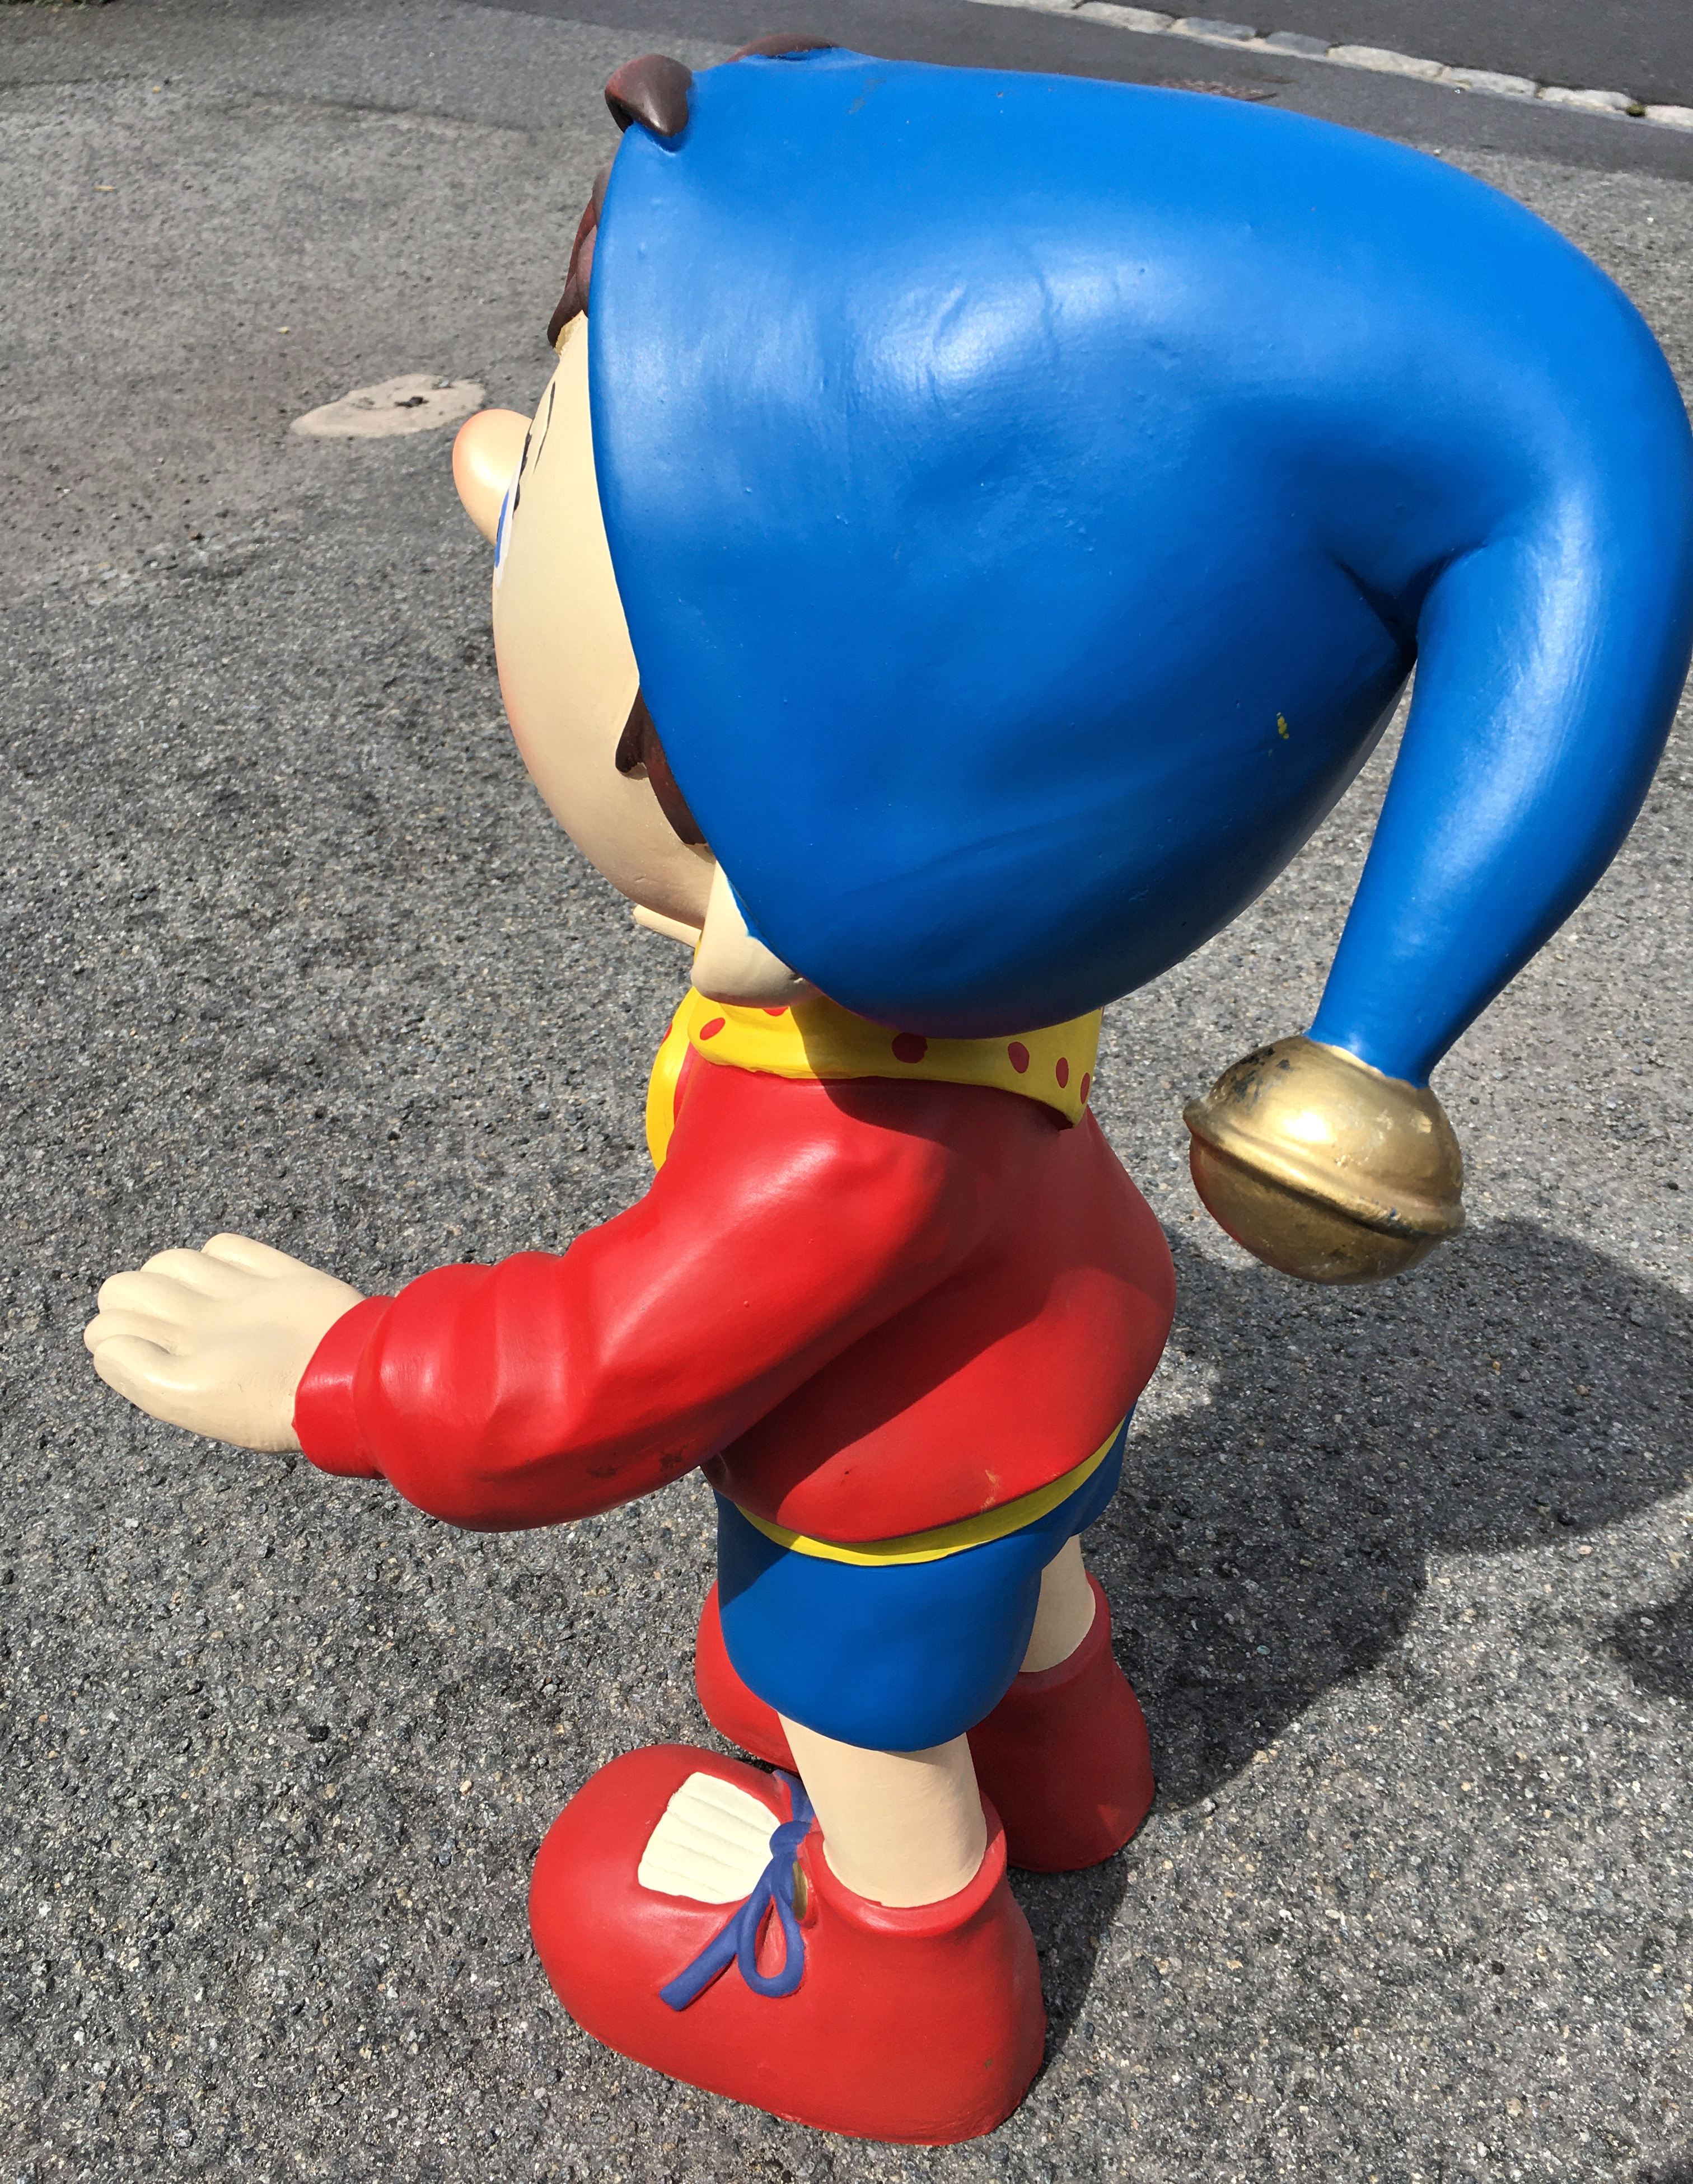 A vintage Noddy shop display figure, in fibreglass, standing 24in. (61cm.) high. - Image 2 of 5